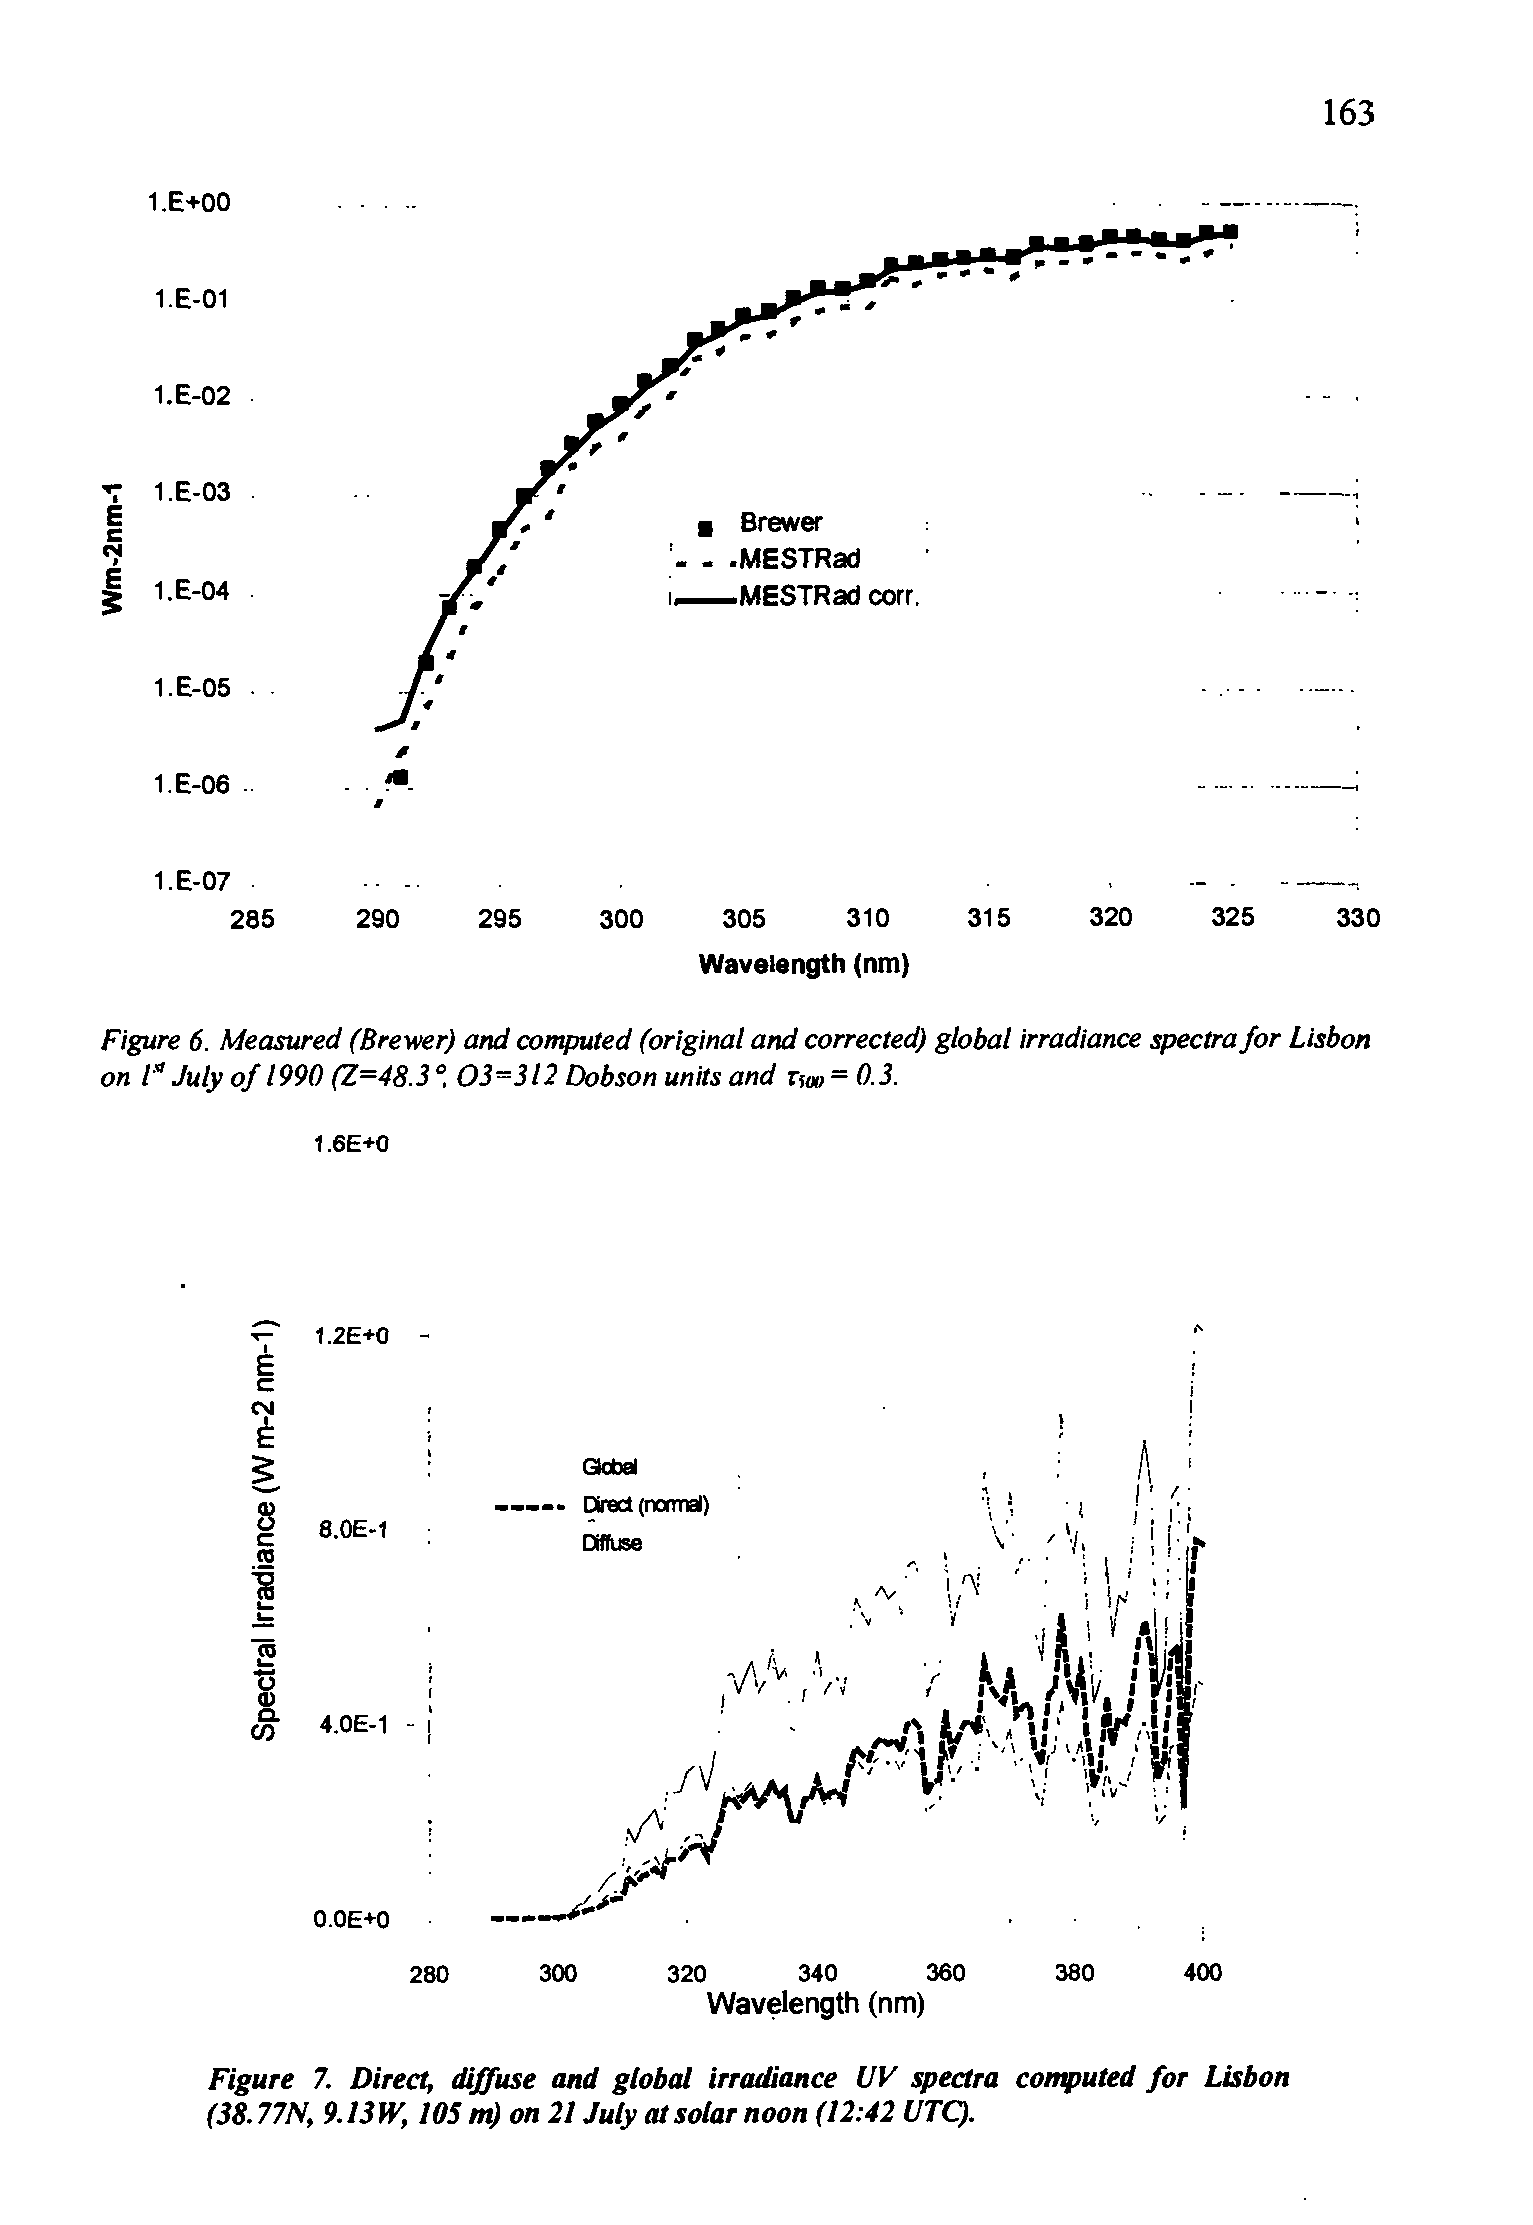 Figure 6. Measured (Brewer) and computed (original and corrected) global irradiance spectra for Lisbon on l July of 1990 (Z=48.3°, 03=312 Dobson units and Tm> =0.3.